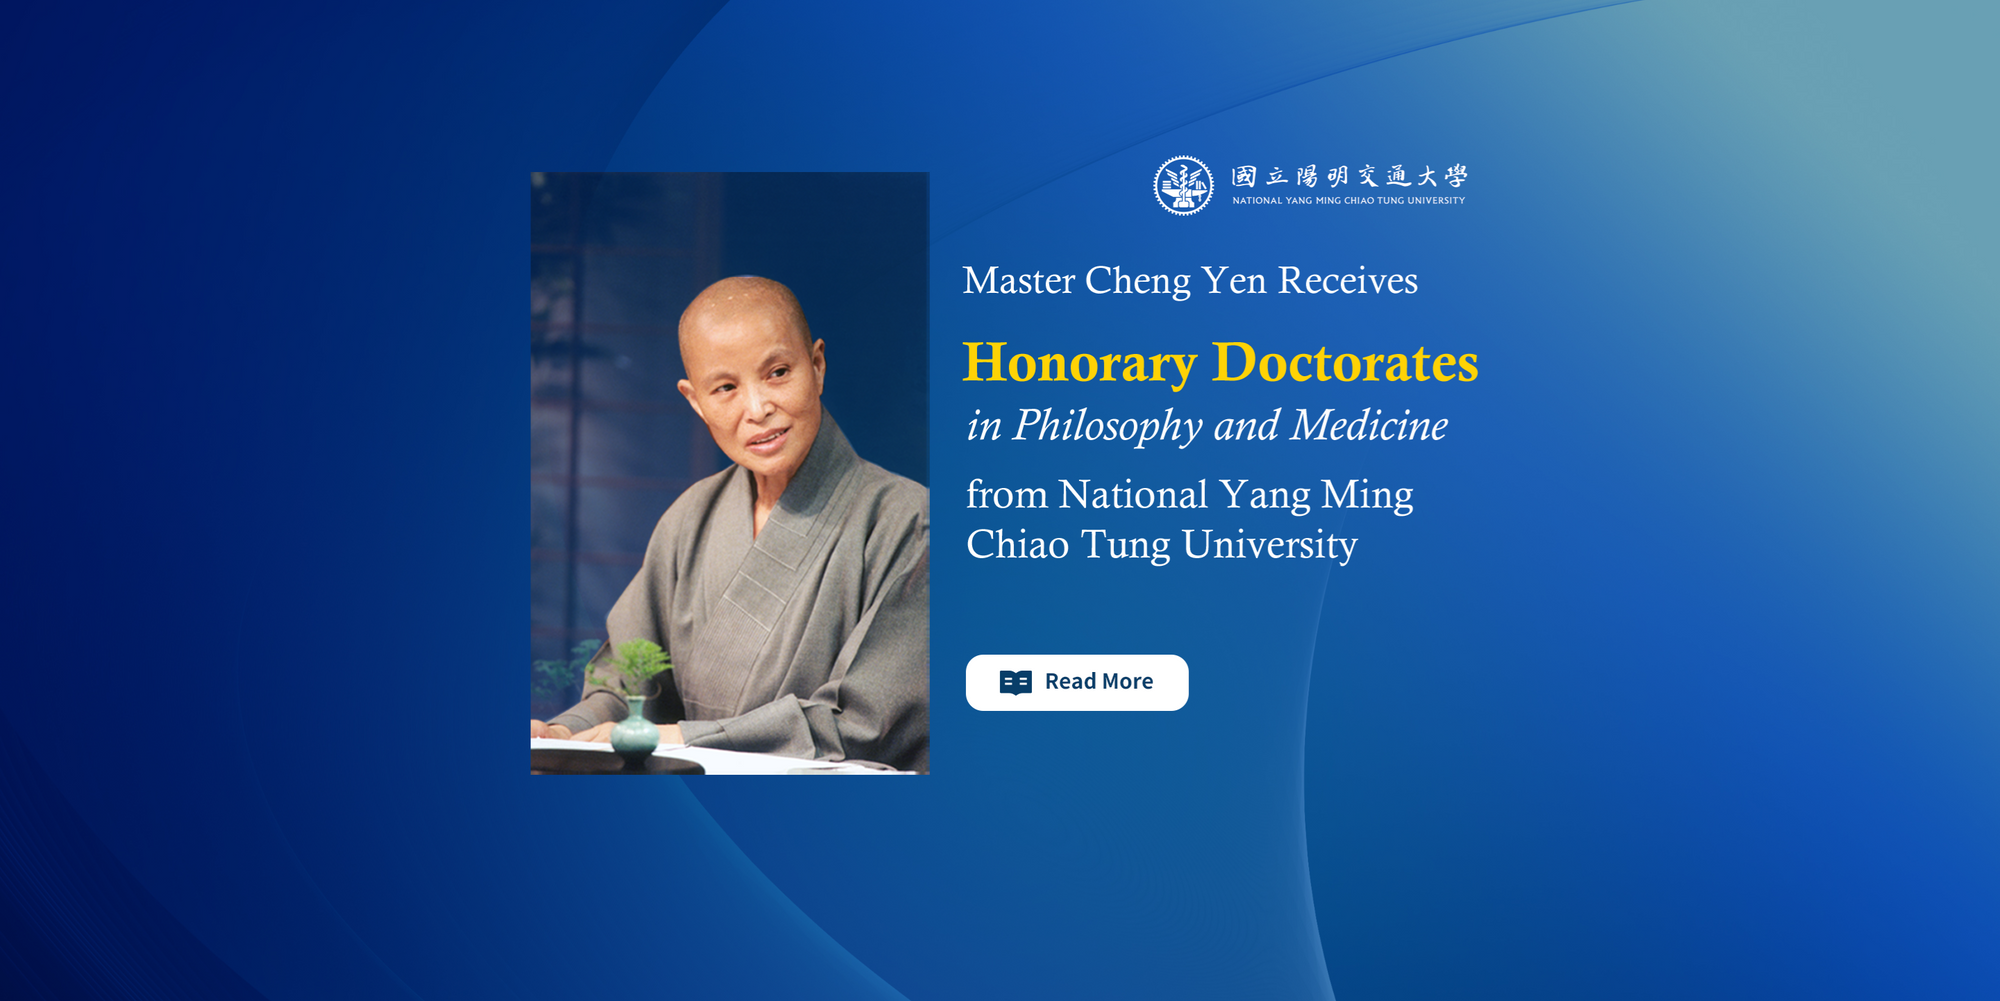 Master Cheng Yen Receives Honorary Doctorates in Philosophy and Medicine from NYCU